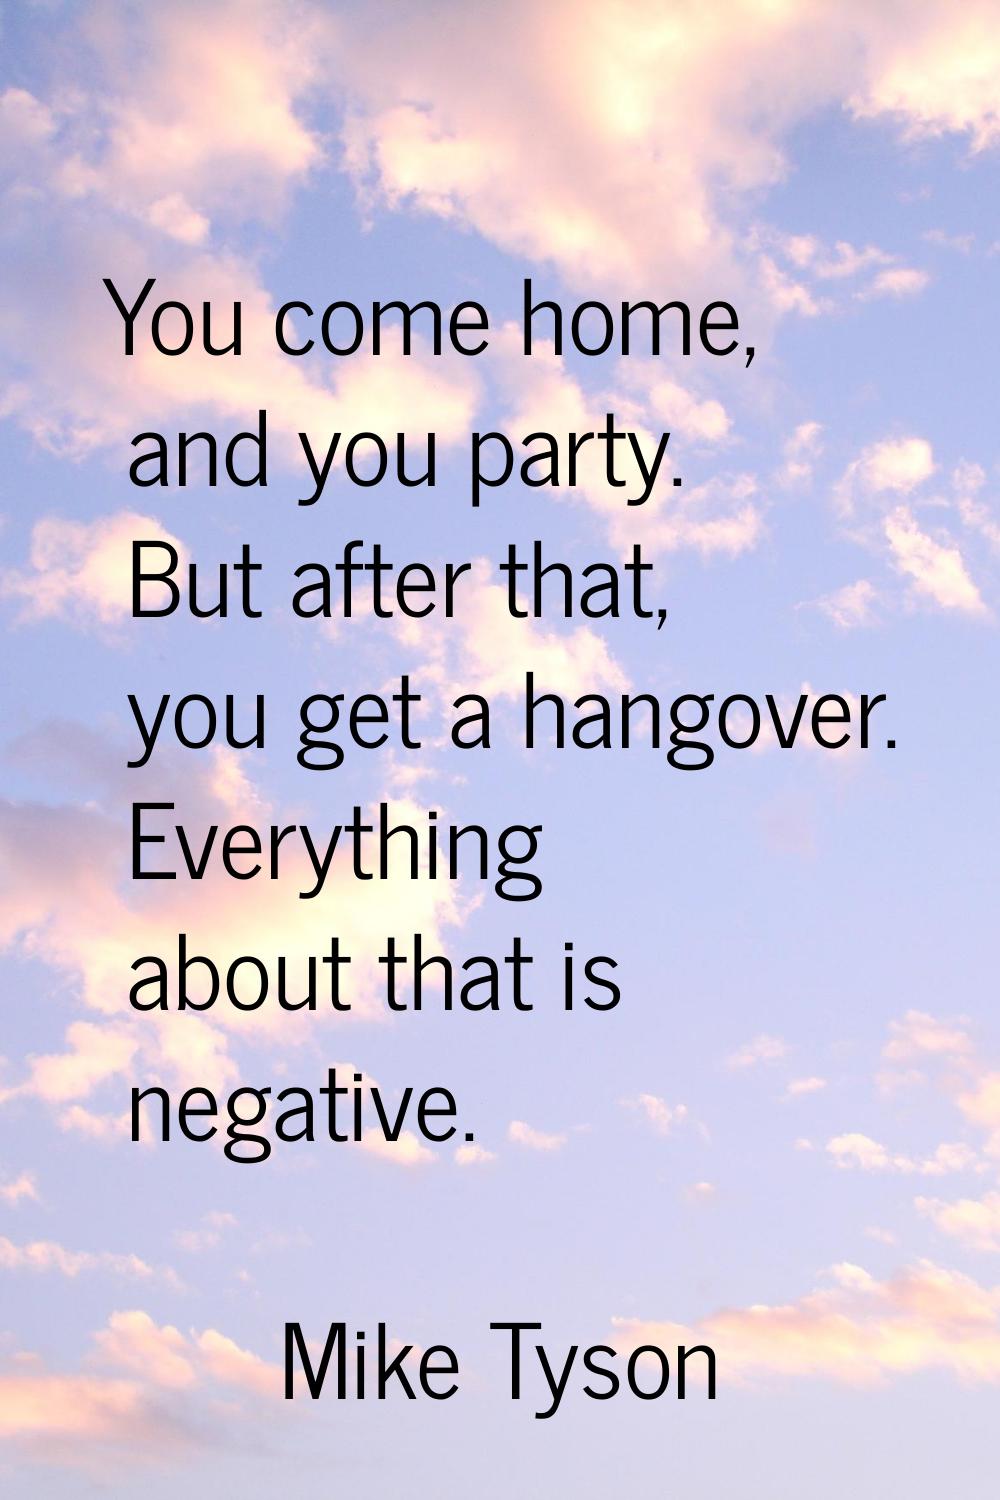 You come home, and you party. But after that, you get a hangover. Everything about that is negative